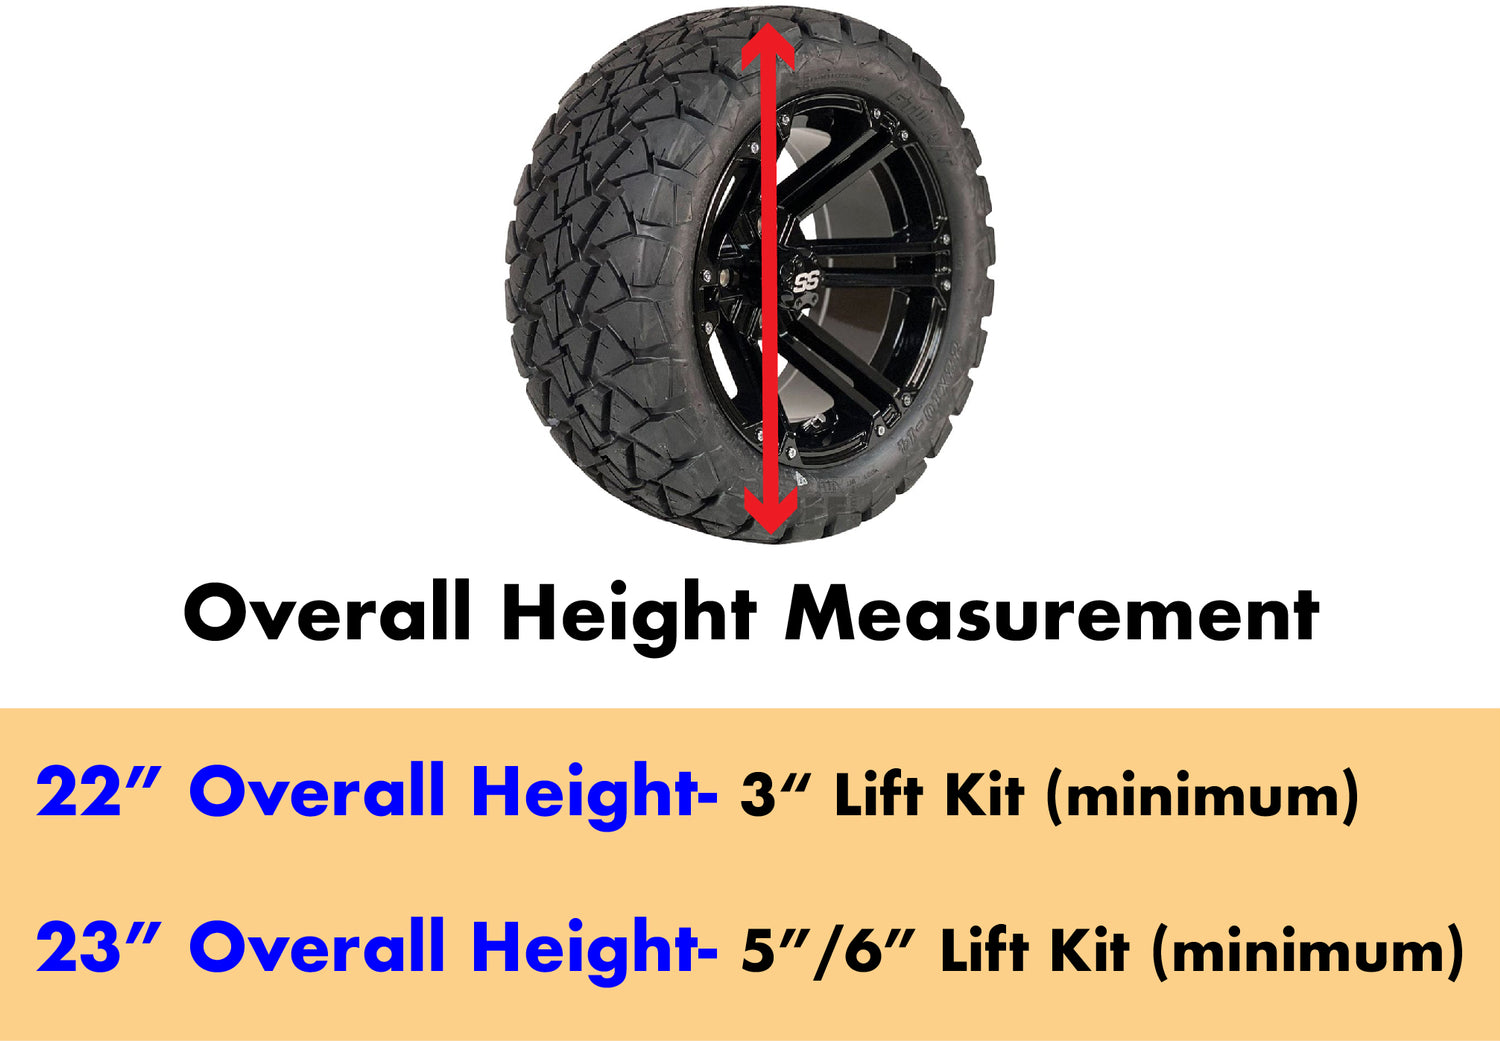 Lifted EZGO Golf Cart Wheel and Tire Sizing Guide for 22"-23" Wheel and Tire Combos